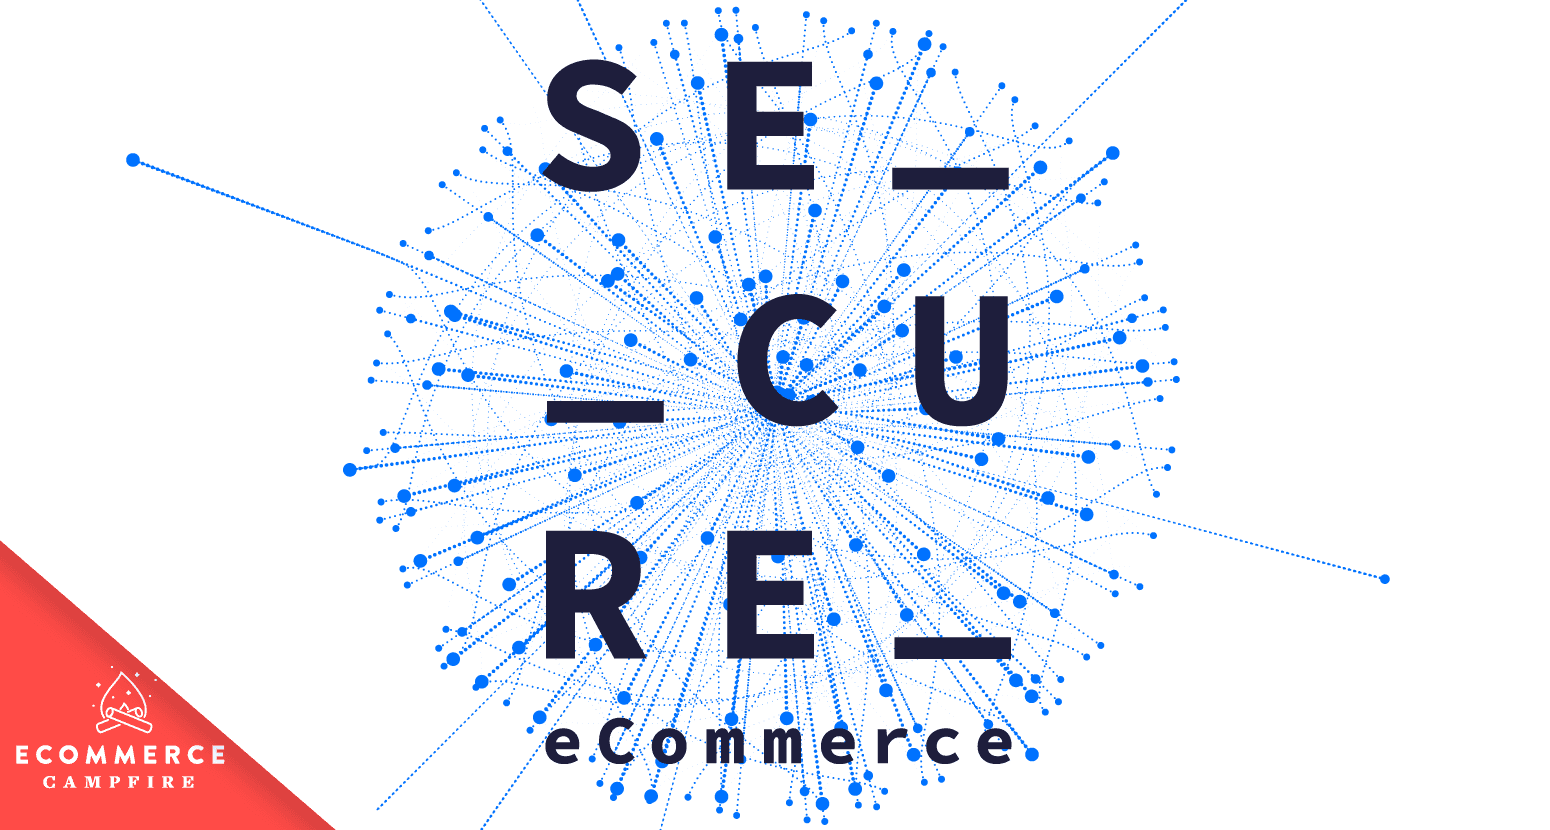 Secure eCommerce: Don’t Get Hacked, Stay Online, and Make Money